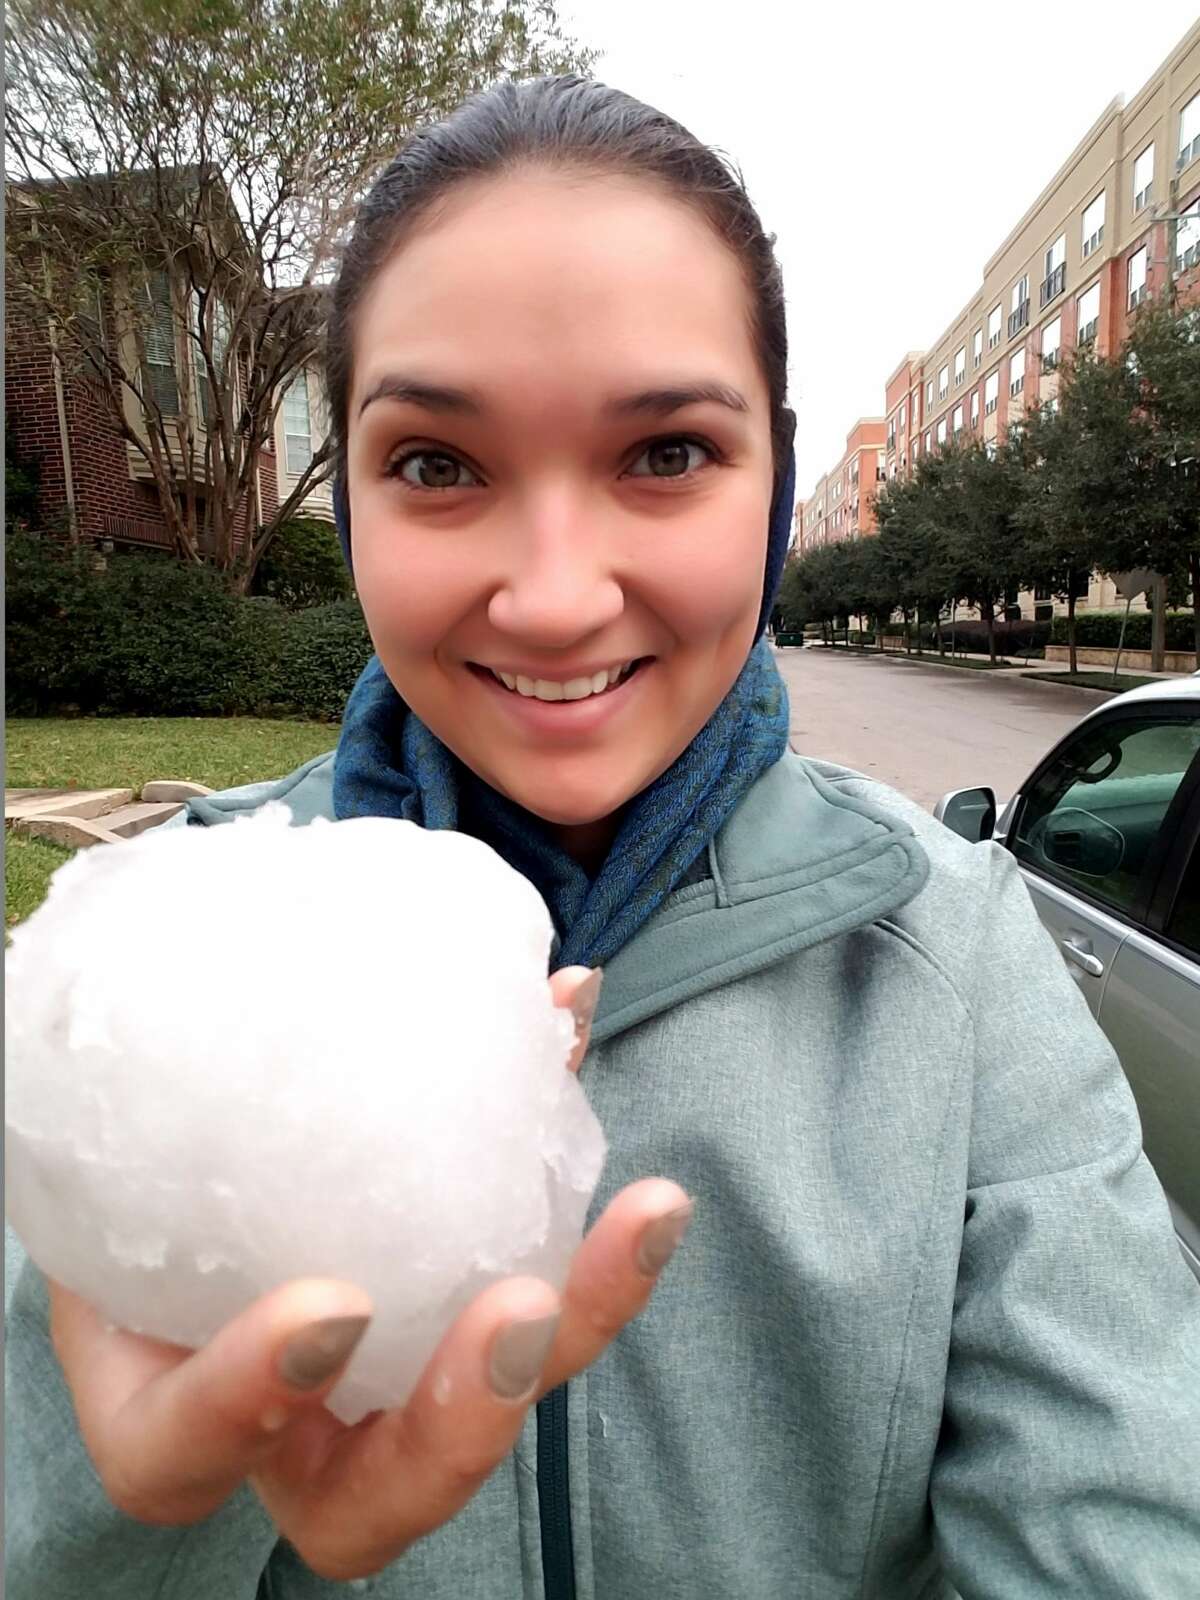 Houston Chronicle staffer Heather Leighton can't contain her excitement and pride over her snowball.